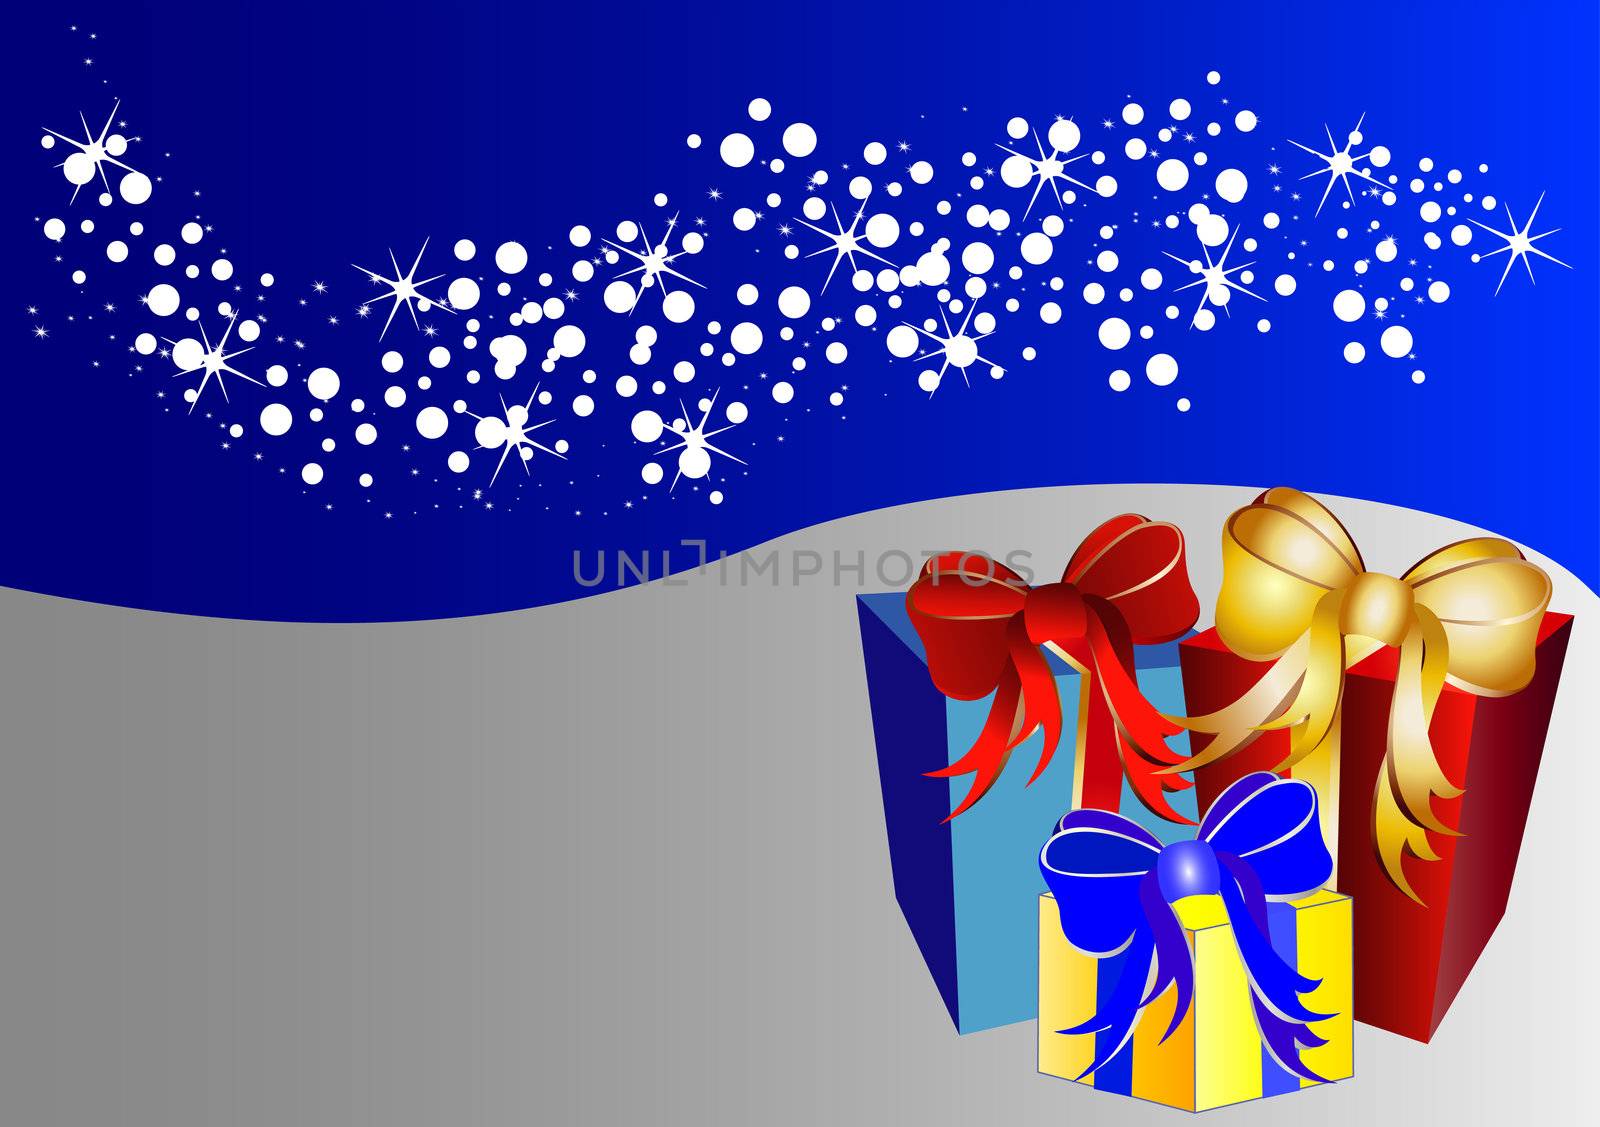  bicolor christmas background with stars and present by peromarketing